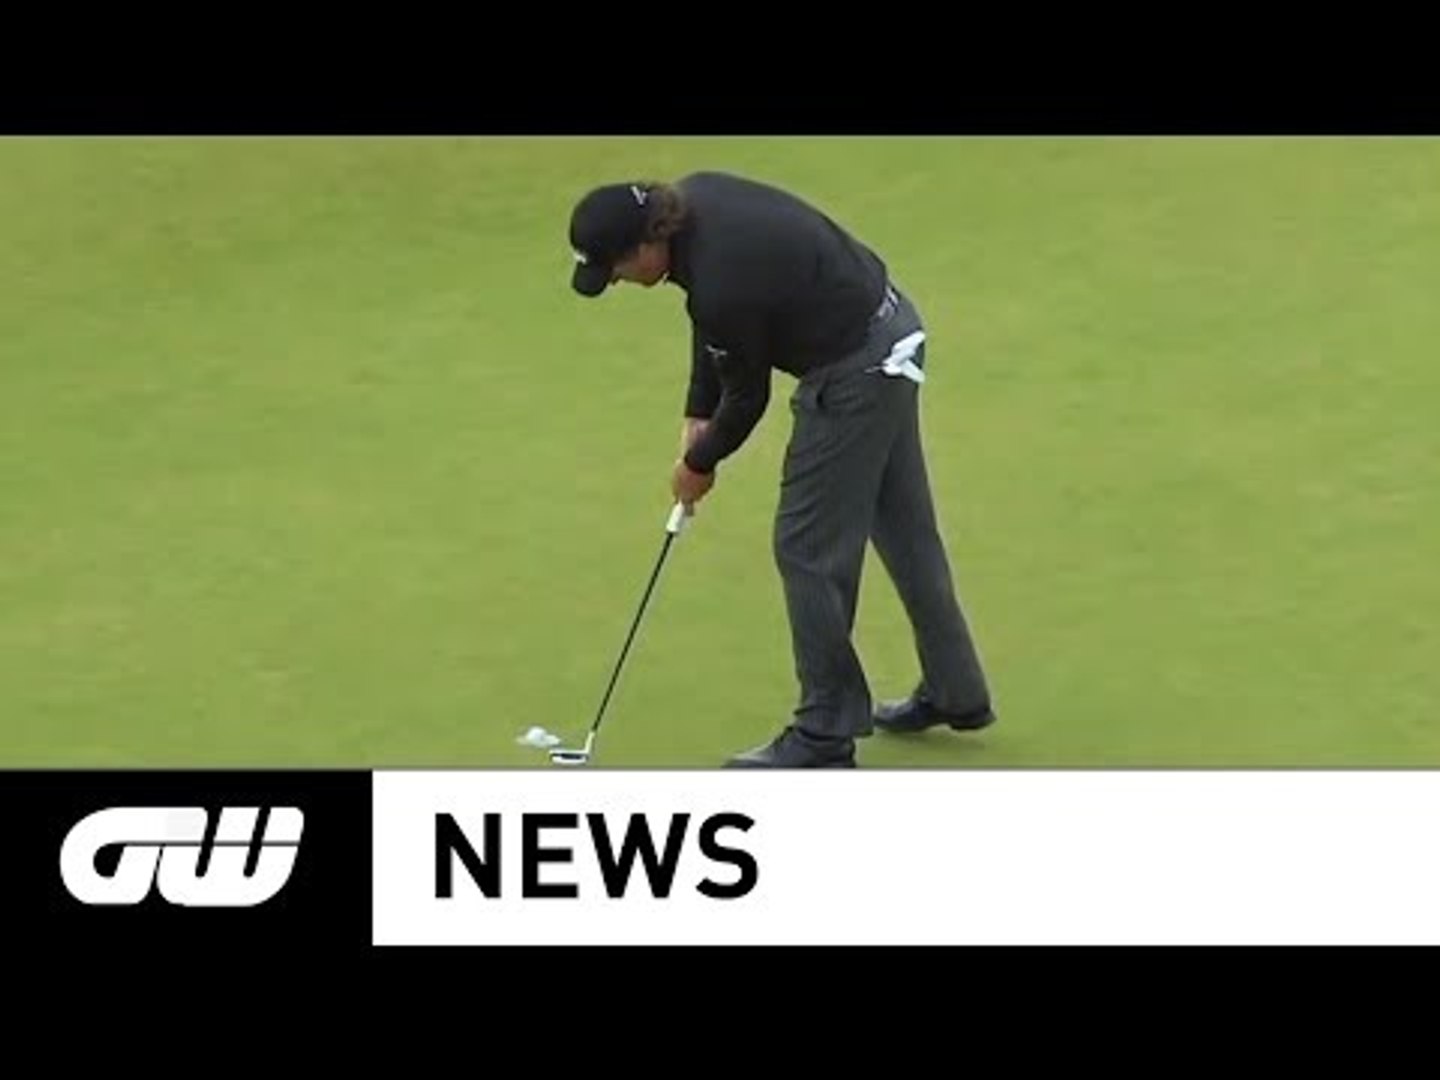 ⁣GW News: Watson makes his pick and McIlroy lines up the Scottish Open